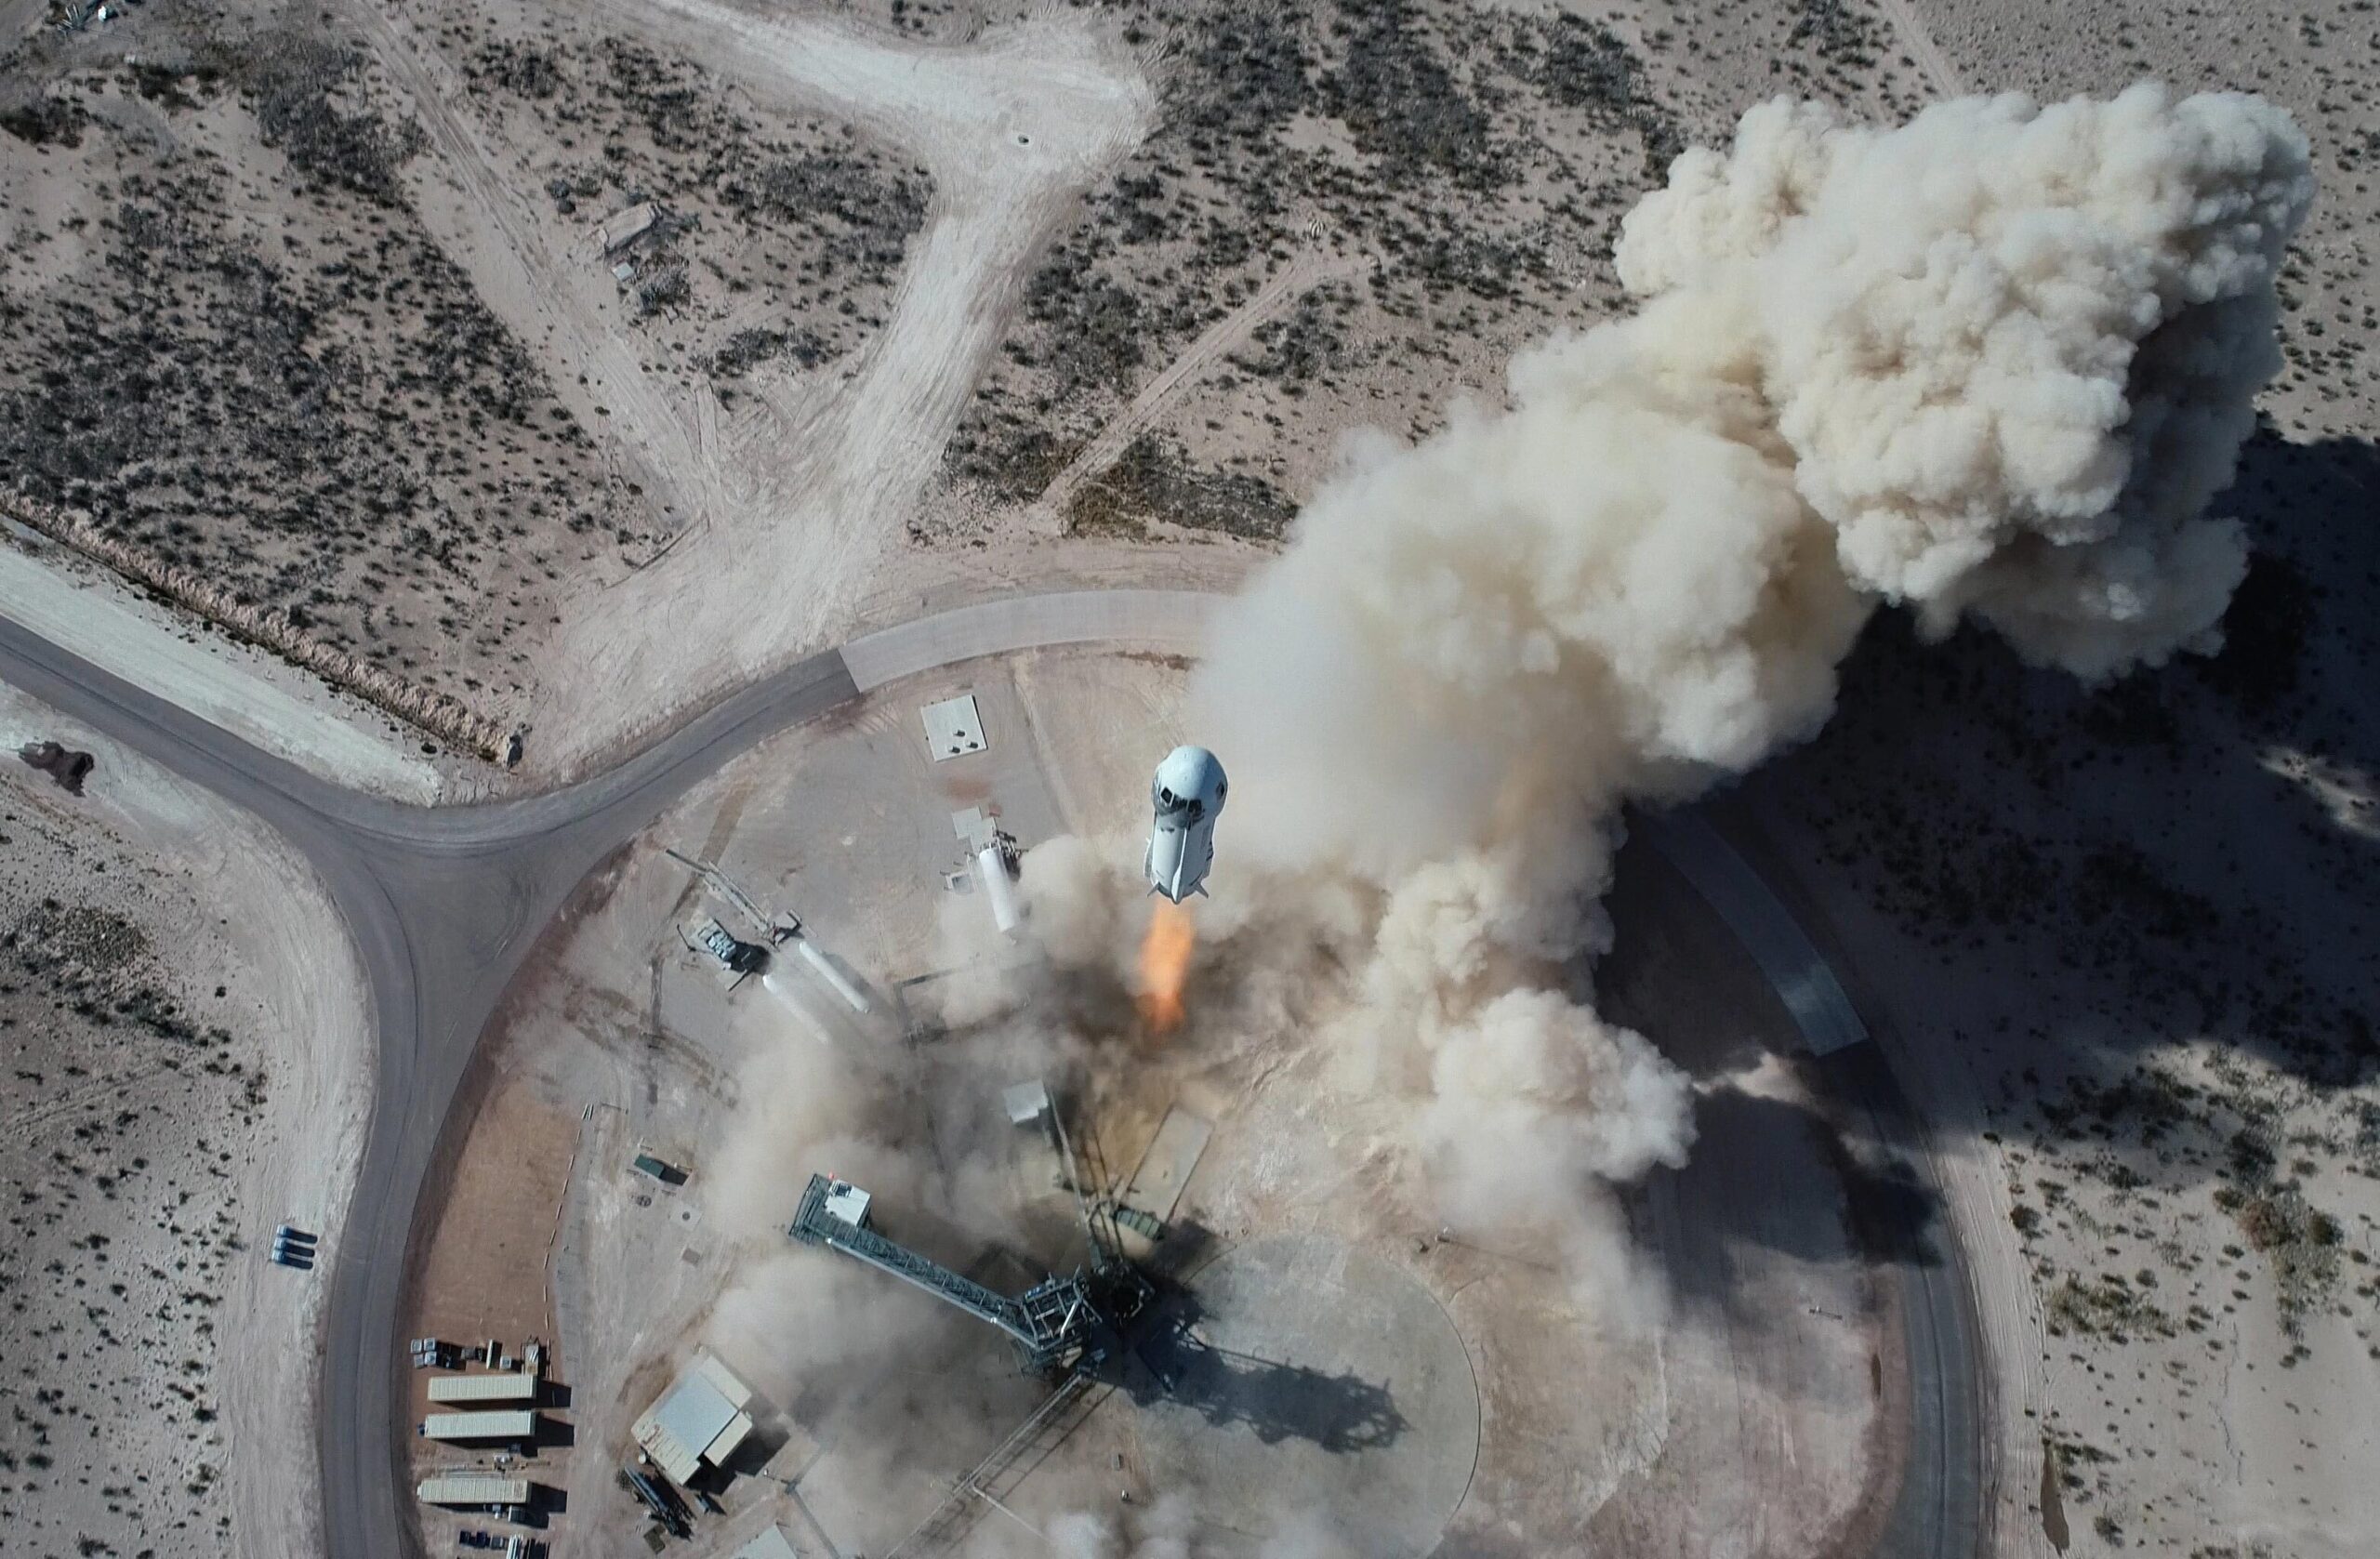 In this Jan. 14, 2021 photo made available by Blue Origin, the New Shepard NS-14 rocket lifts off from Launch Site One in West Texas. On Tuesday, July 20, 2021, Blue Origin’s 60-foot (18-meter) New Shepard rocket will accelerate toward space at three times the speed of sound, or Mach 3, before separating from the capsule and returning for an upright landing. (Blue Origin via AP)